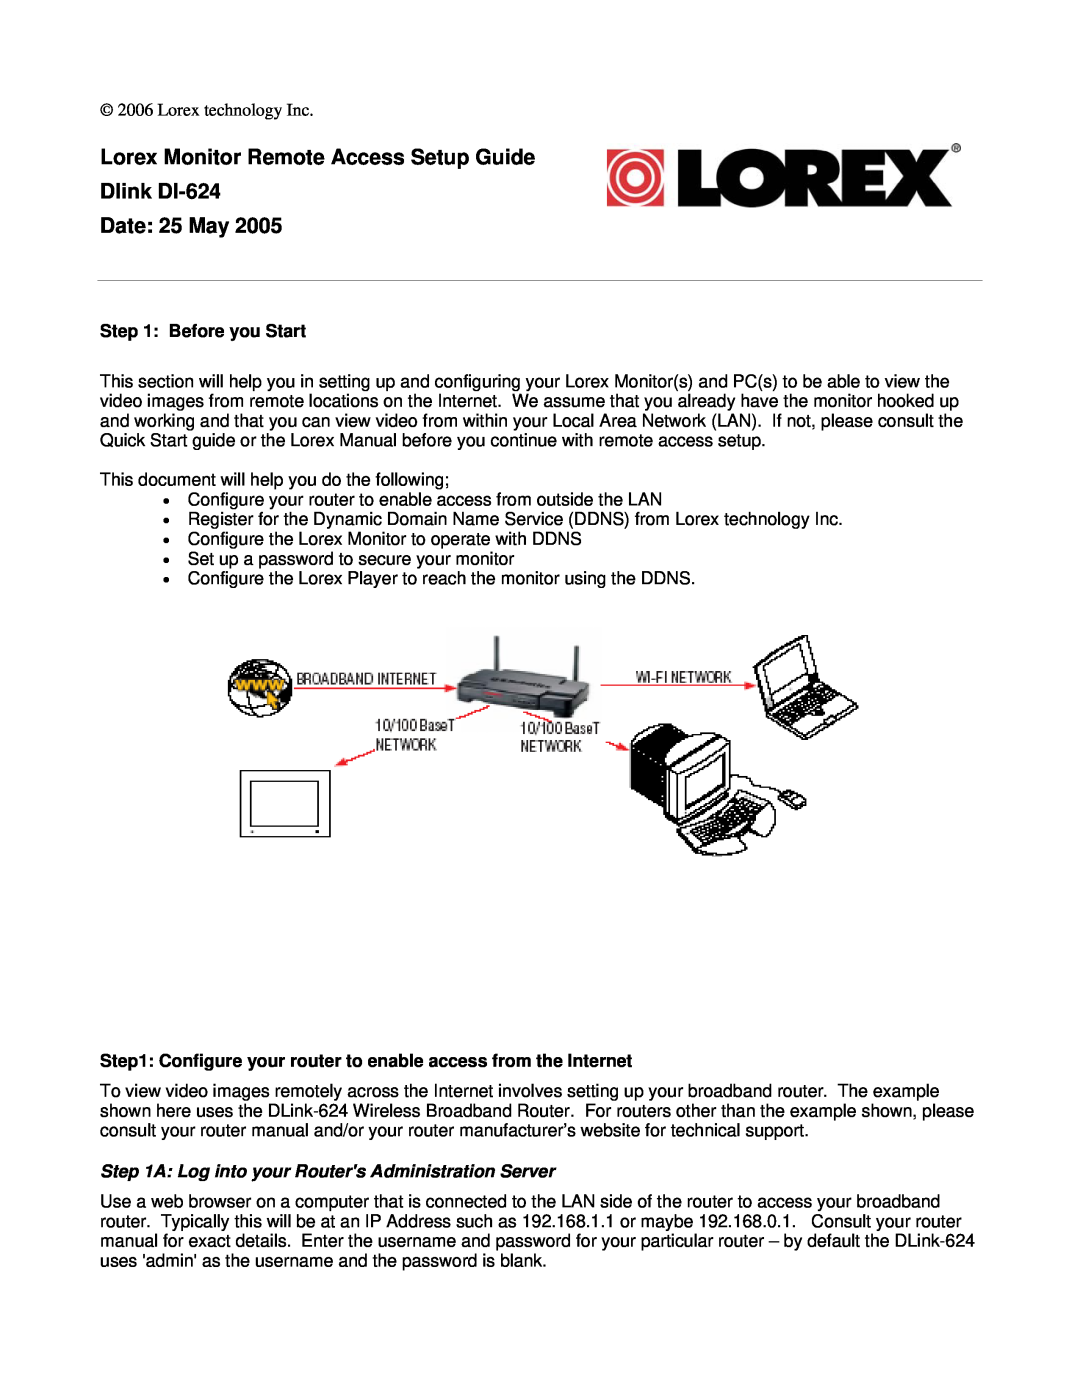 LOREX Technology Dlink DI-624 setup guide Before you Start, Configure your router to enable access from the Internet 